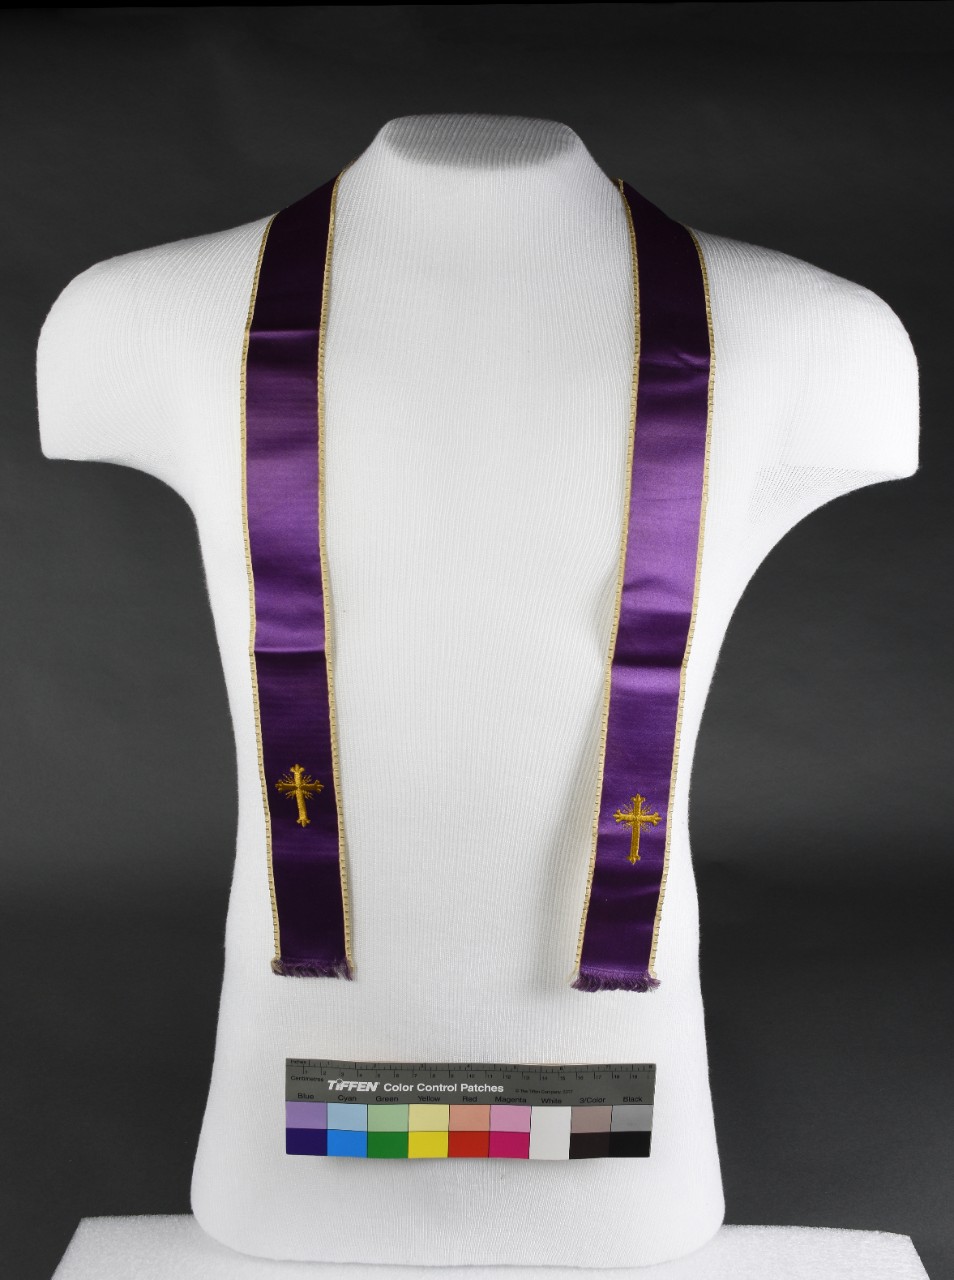 Purple ribbon sash with gold embroidered crosses and edges belonging to LT JF Crotty 